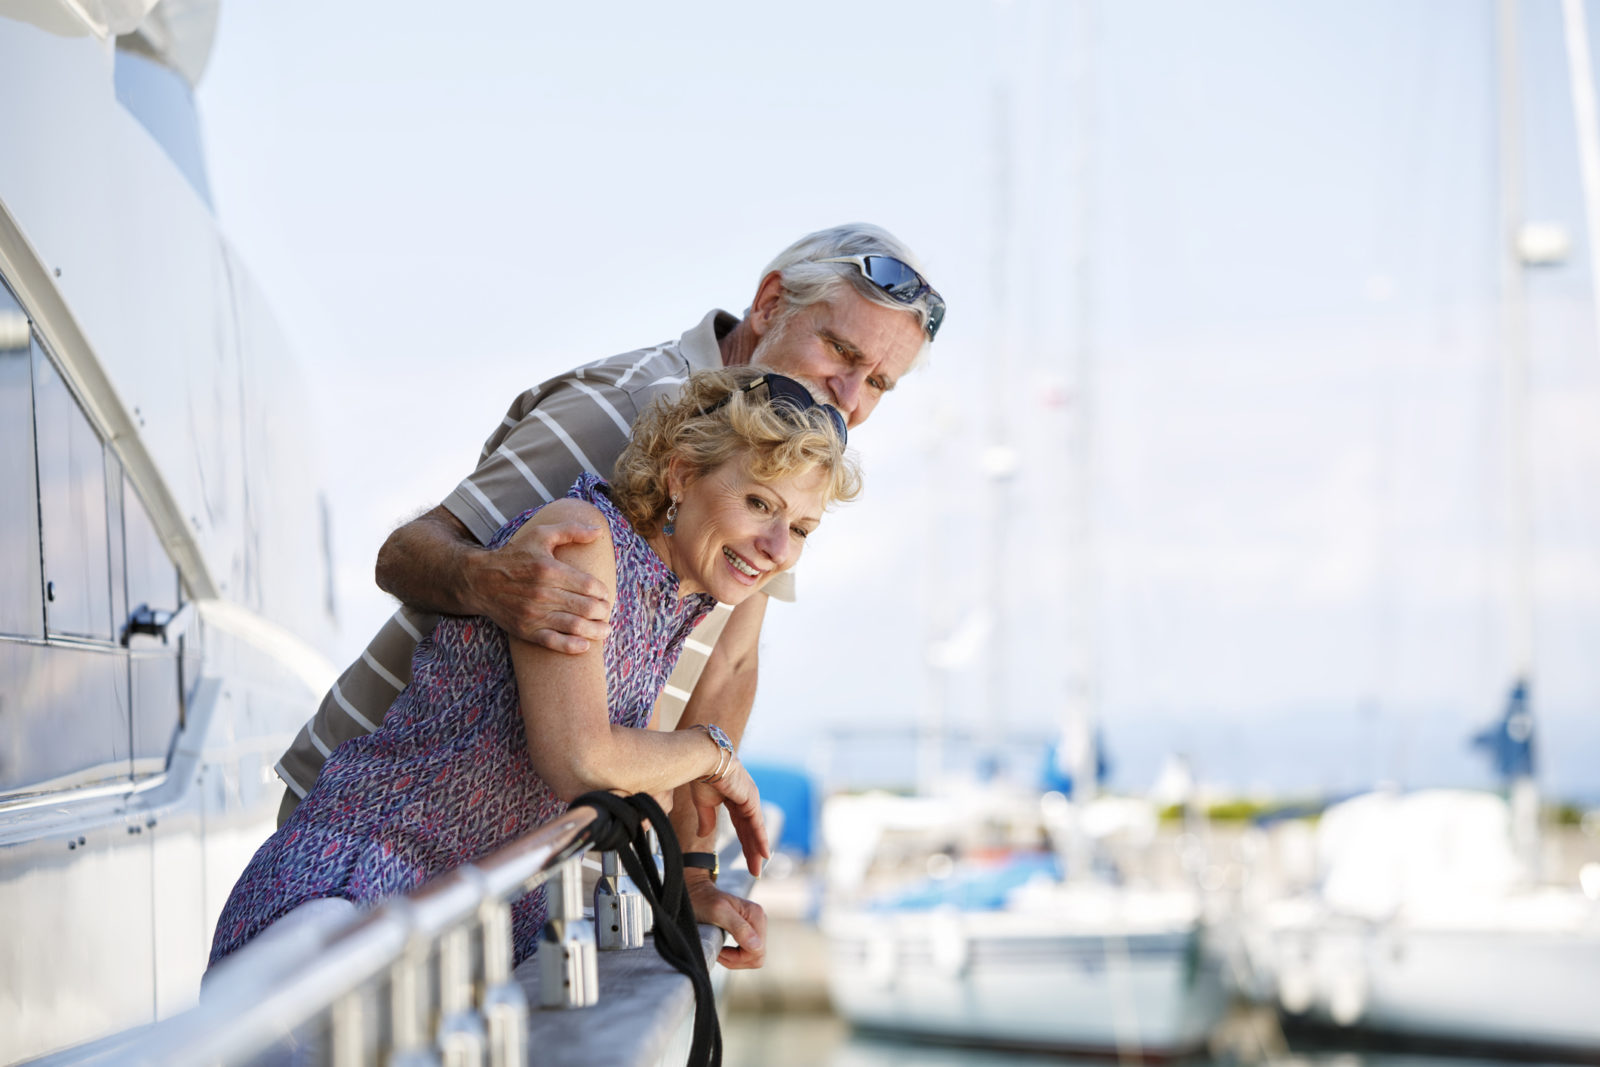 senior couple relaxing and sailing on their boat. The man is hugging his wife and they are smiling. In the background we can see the sea and some boats and yachts.